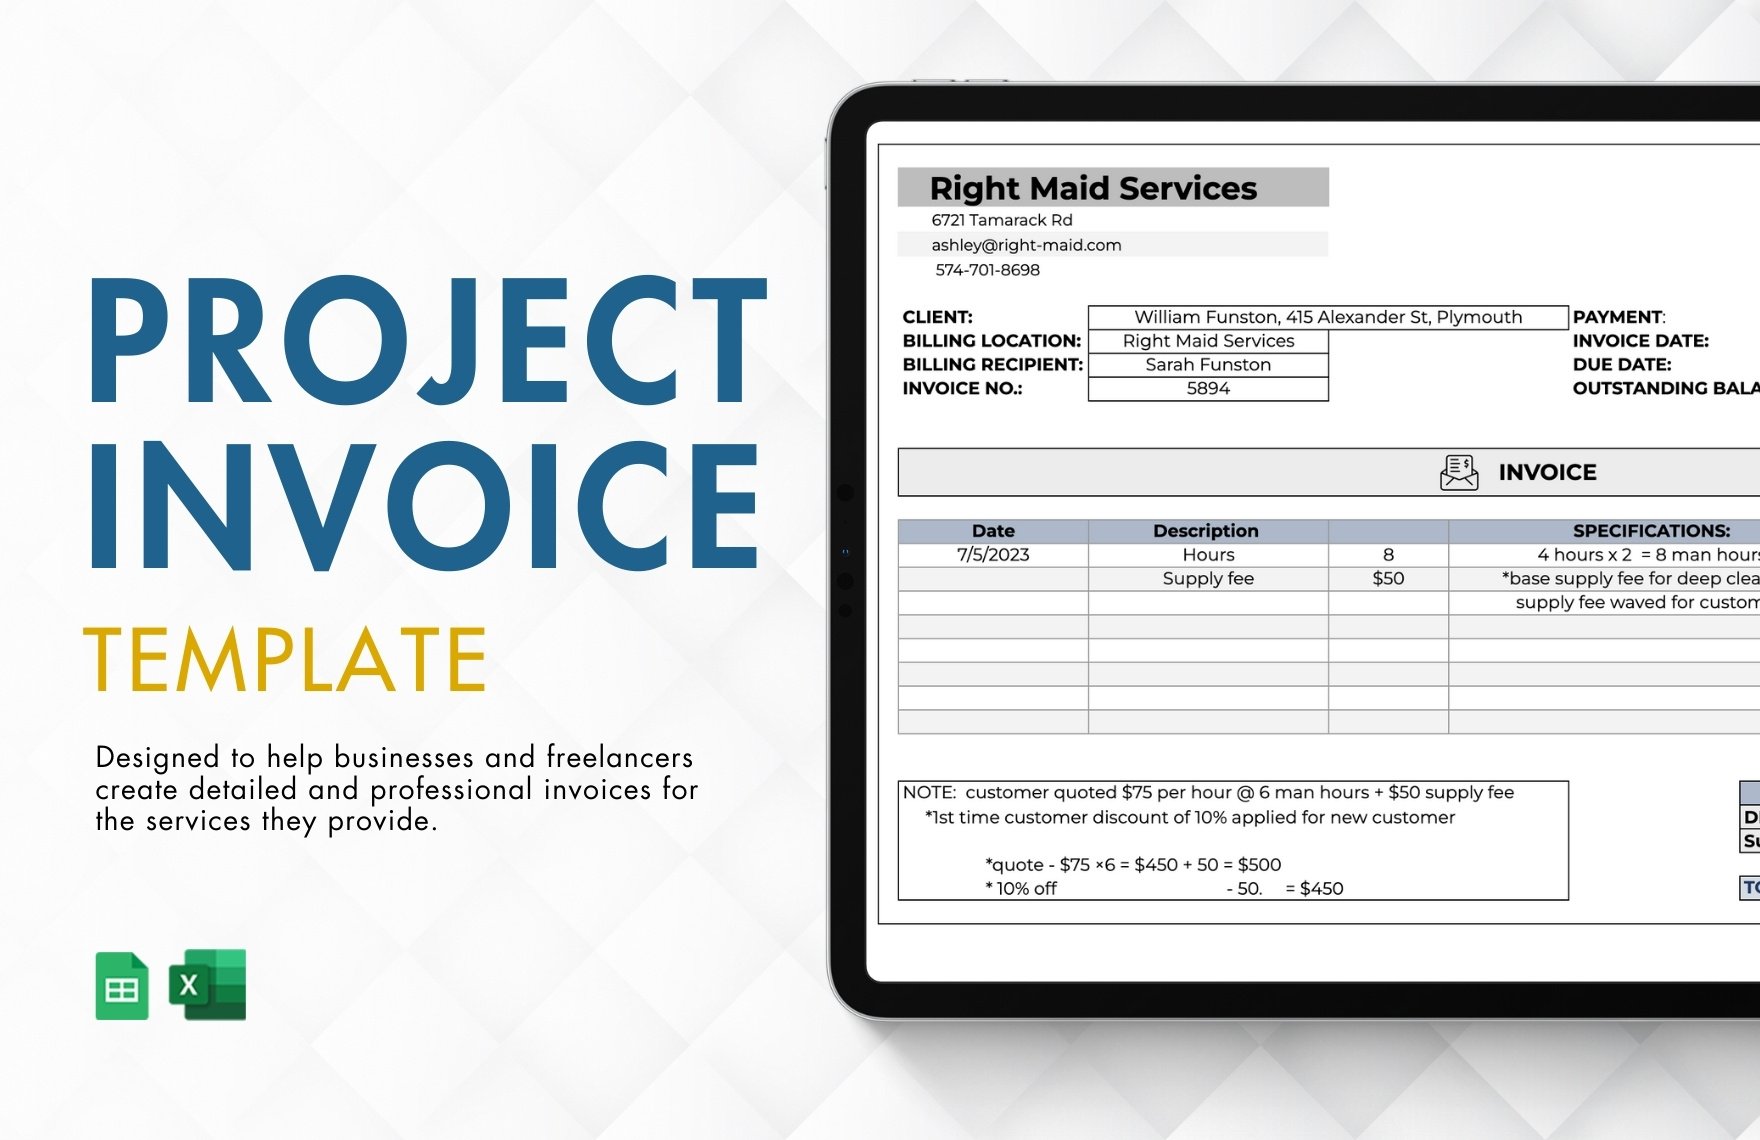 Project Invoice Template